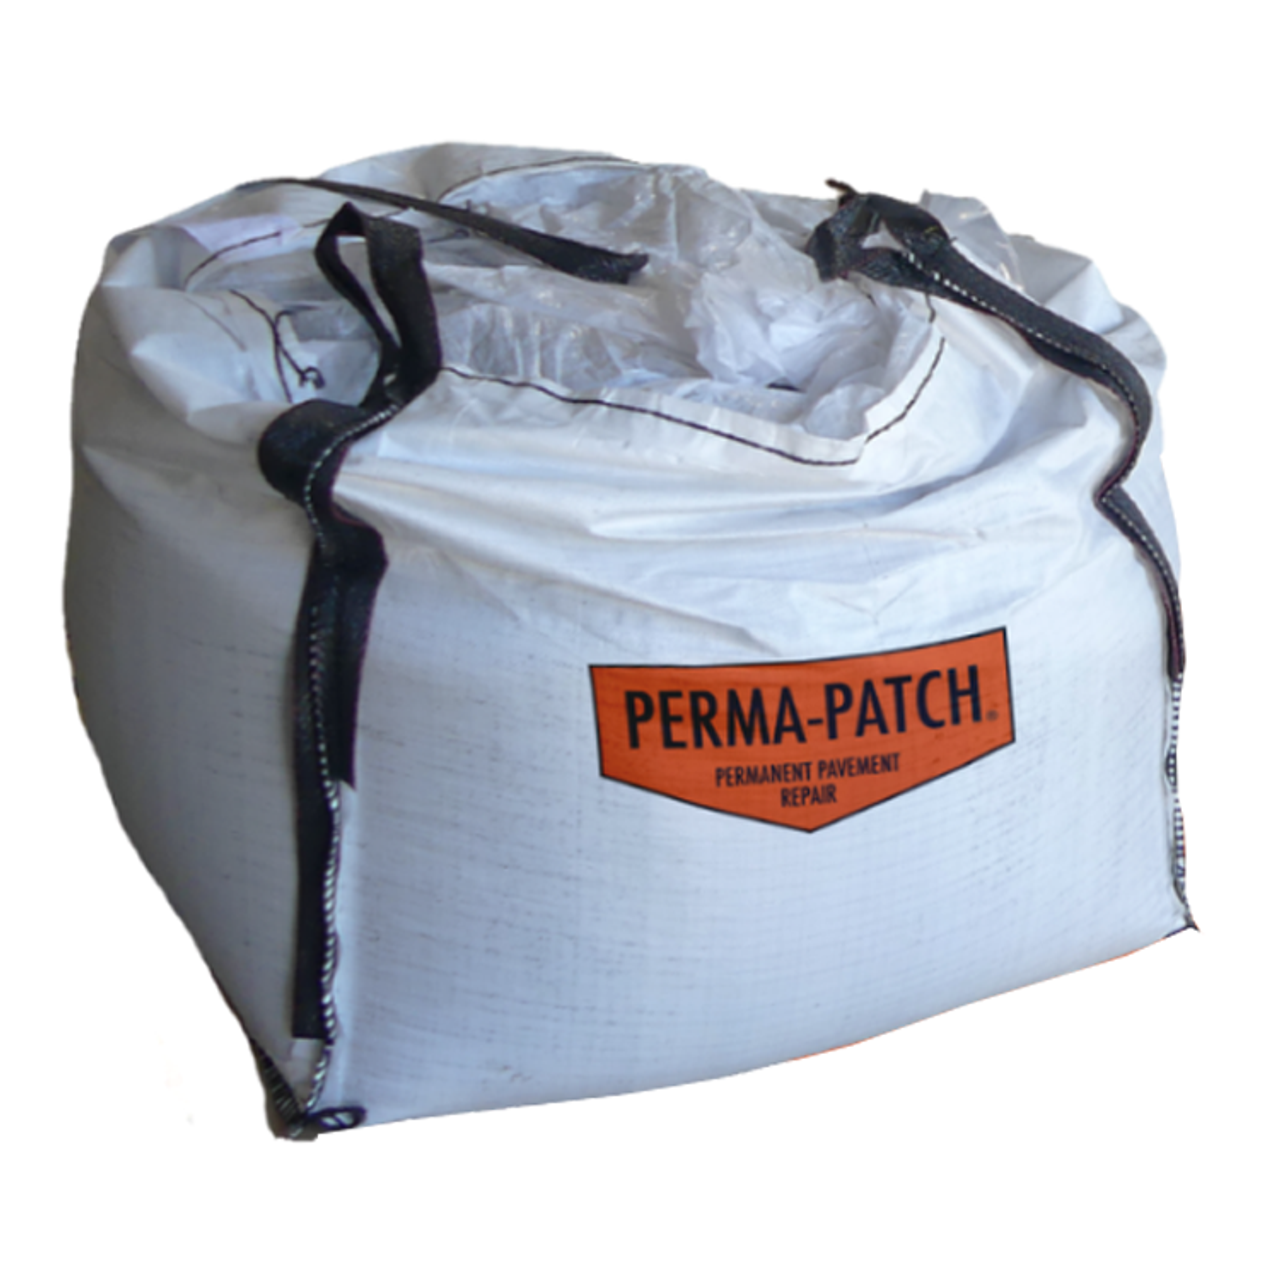 Perma Patch Bulk Bag - Only Available By Phone 800-245-8339 (PERMA PP-2000-BC)